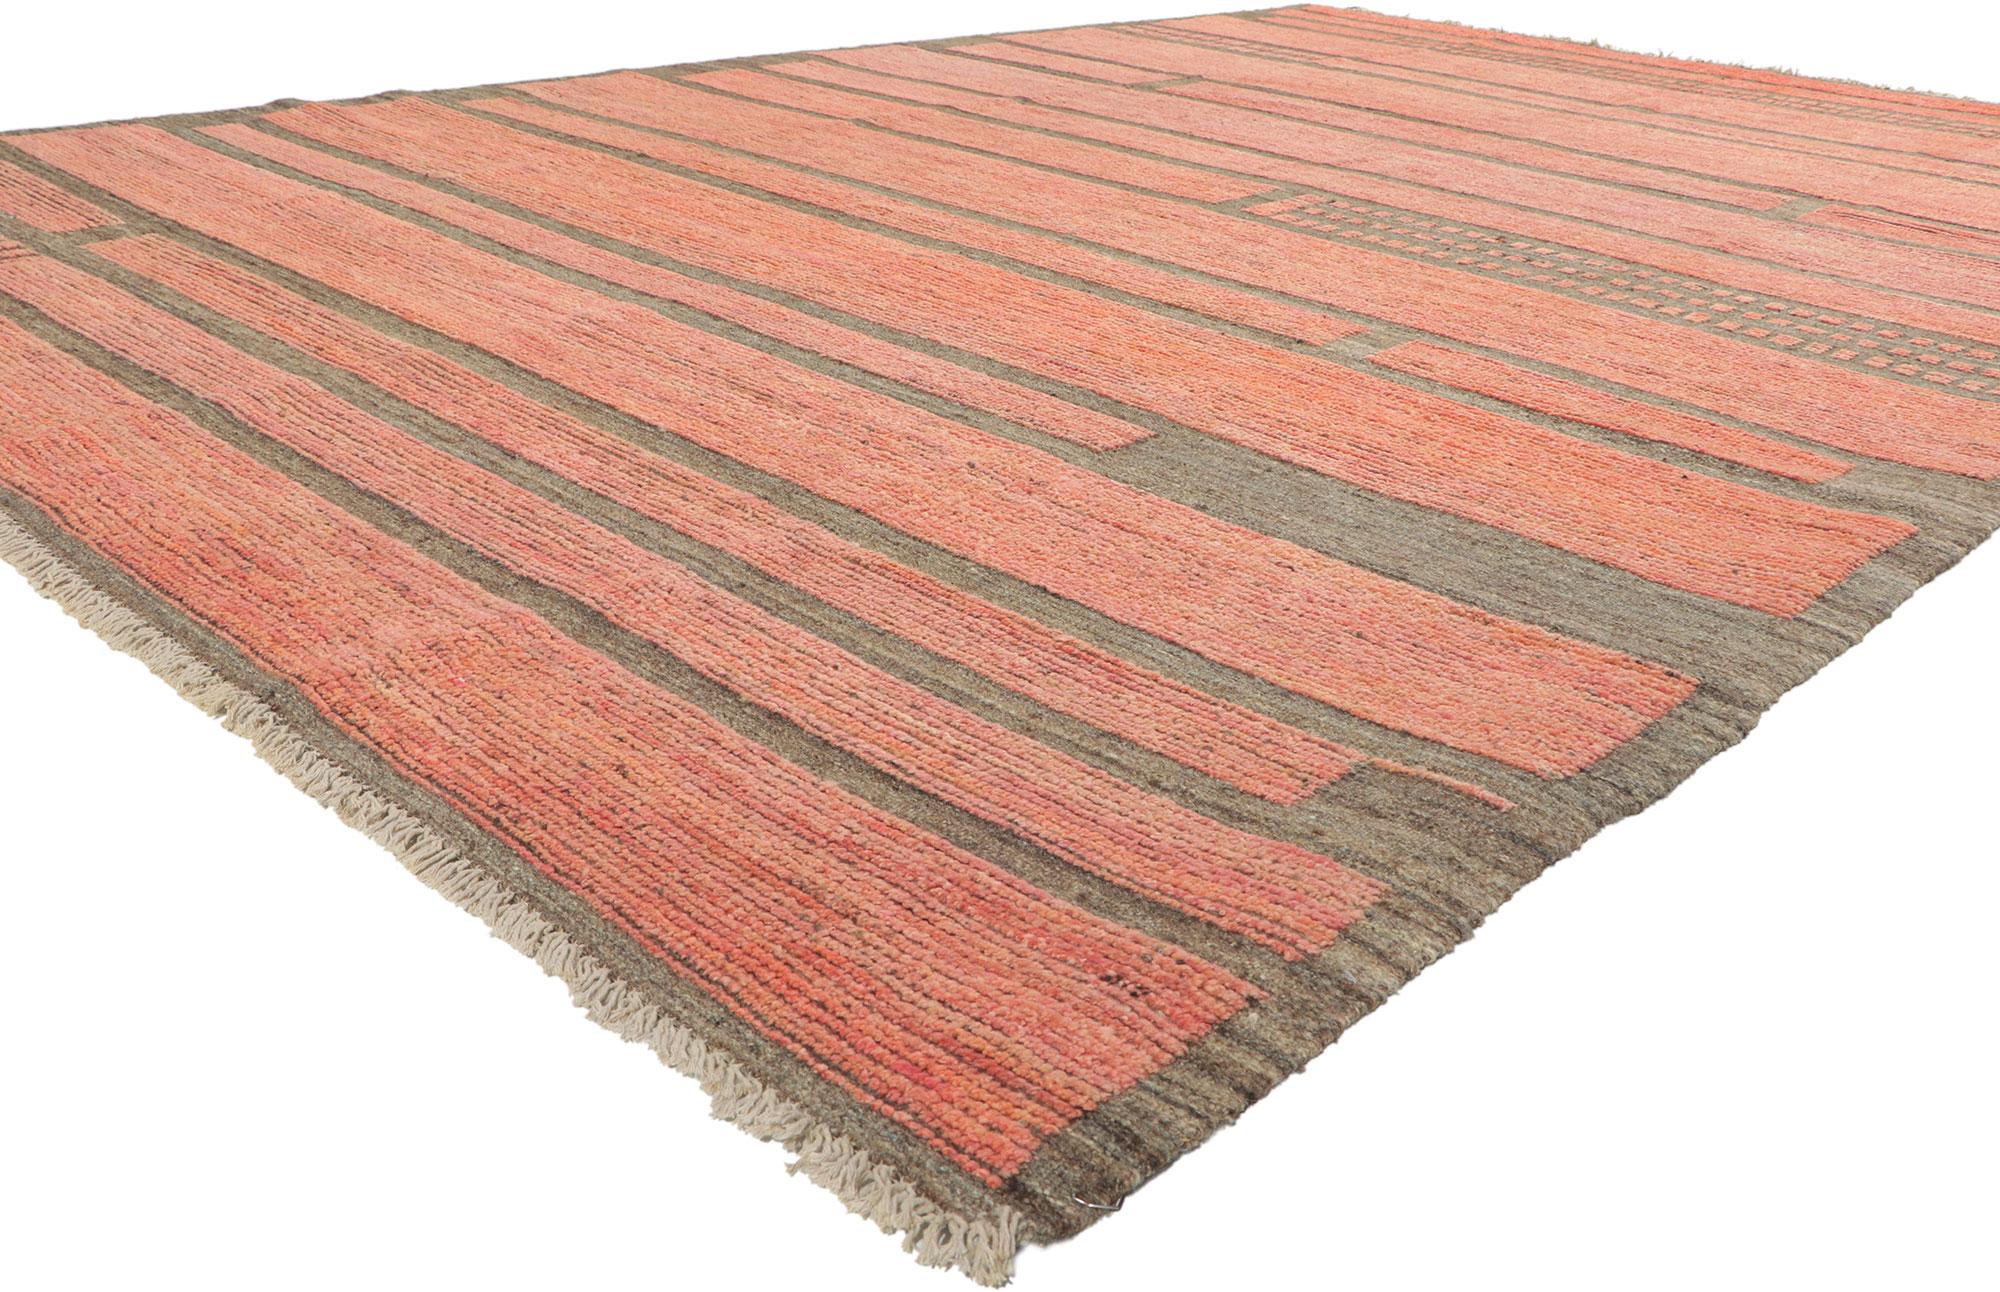 80948 New Contemporary Moroccan Rug, 08'04 x 12'03. Showcasing an expressive design, incredible detail and texture, this hand knotted wool contemporary Moroccan area rug is a captivating vision of woven beauty. The textures and lines hark back to